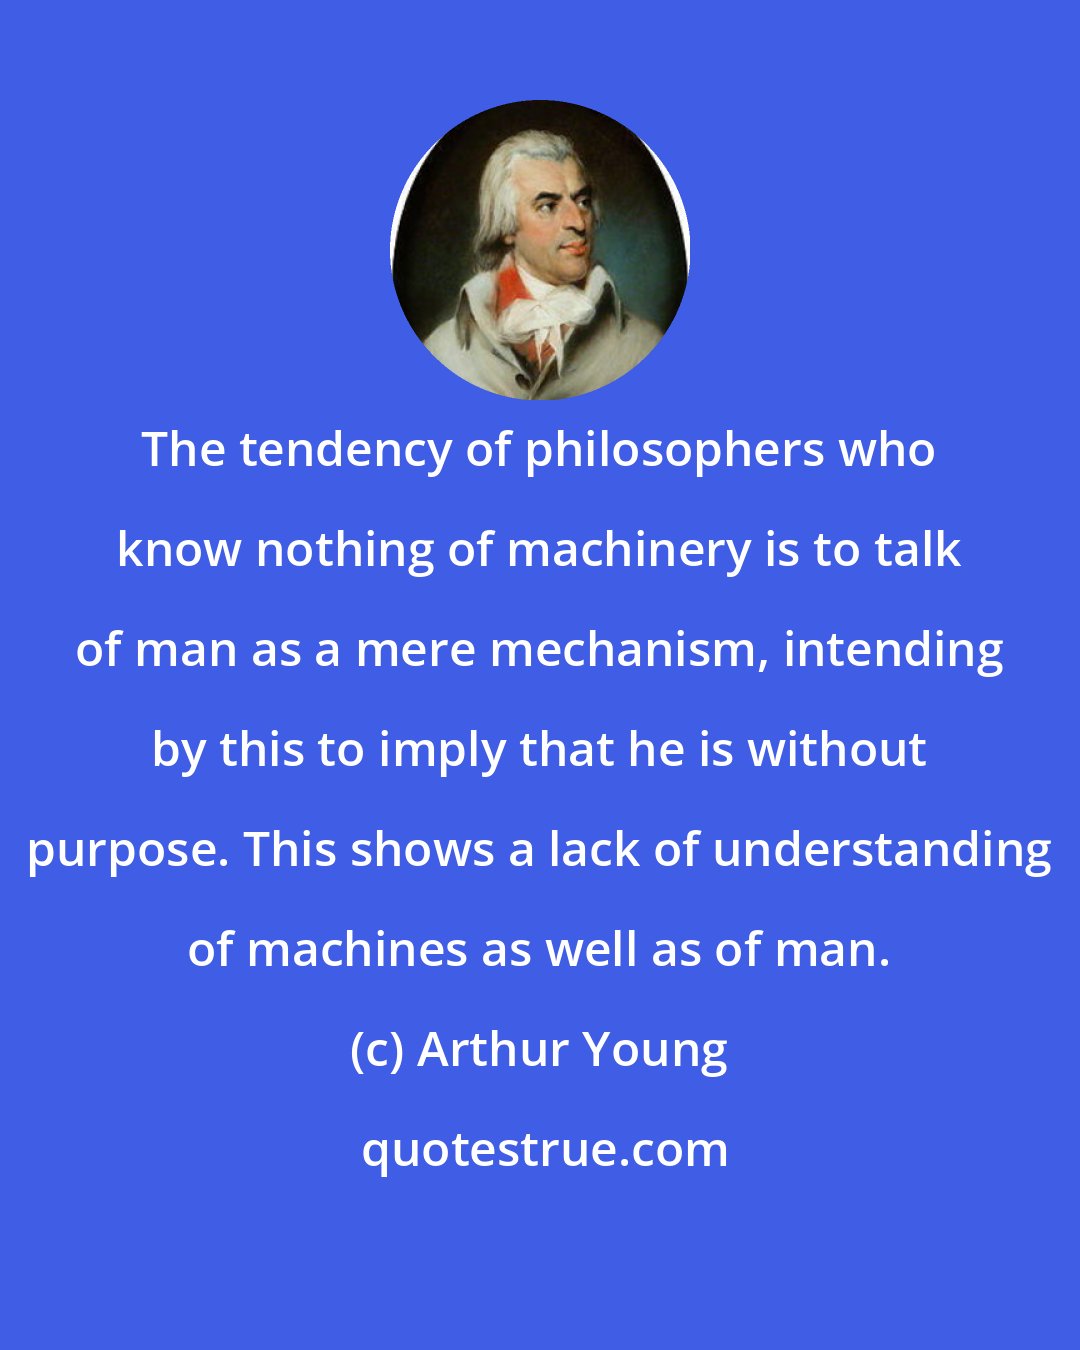 Arthur Young: The tendency of philosophers who know nothing of machinery is to talk of man as a mere mechanism, intending by this to imply that he is without purpose. This shows a lack of understanding of machines as well as of man.